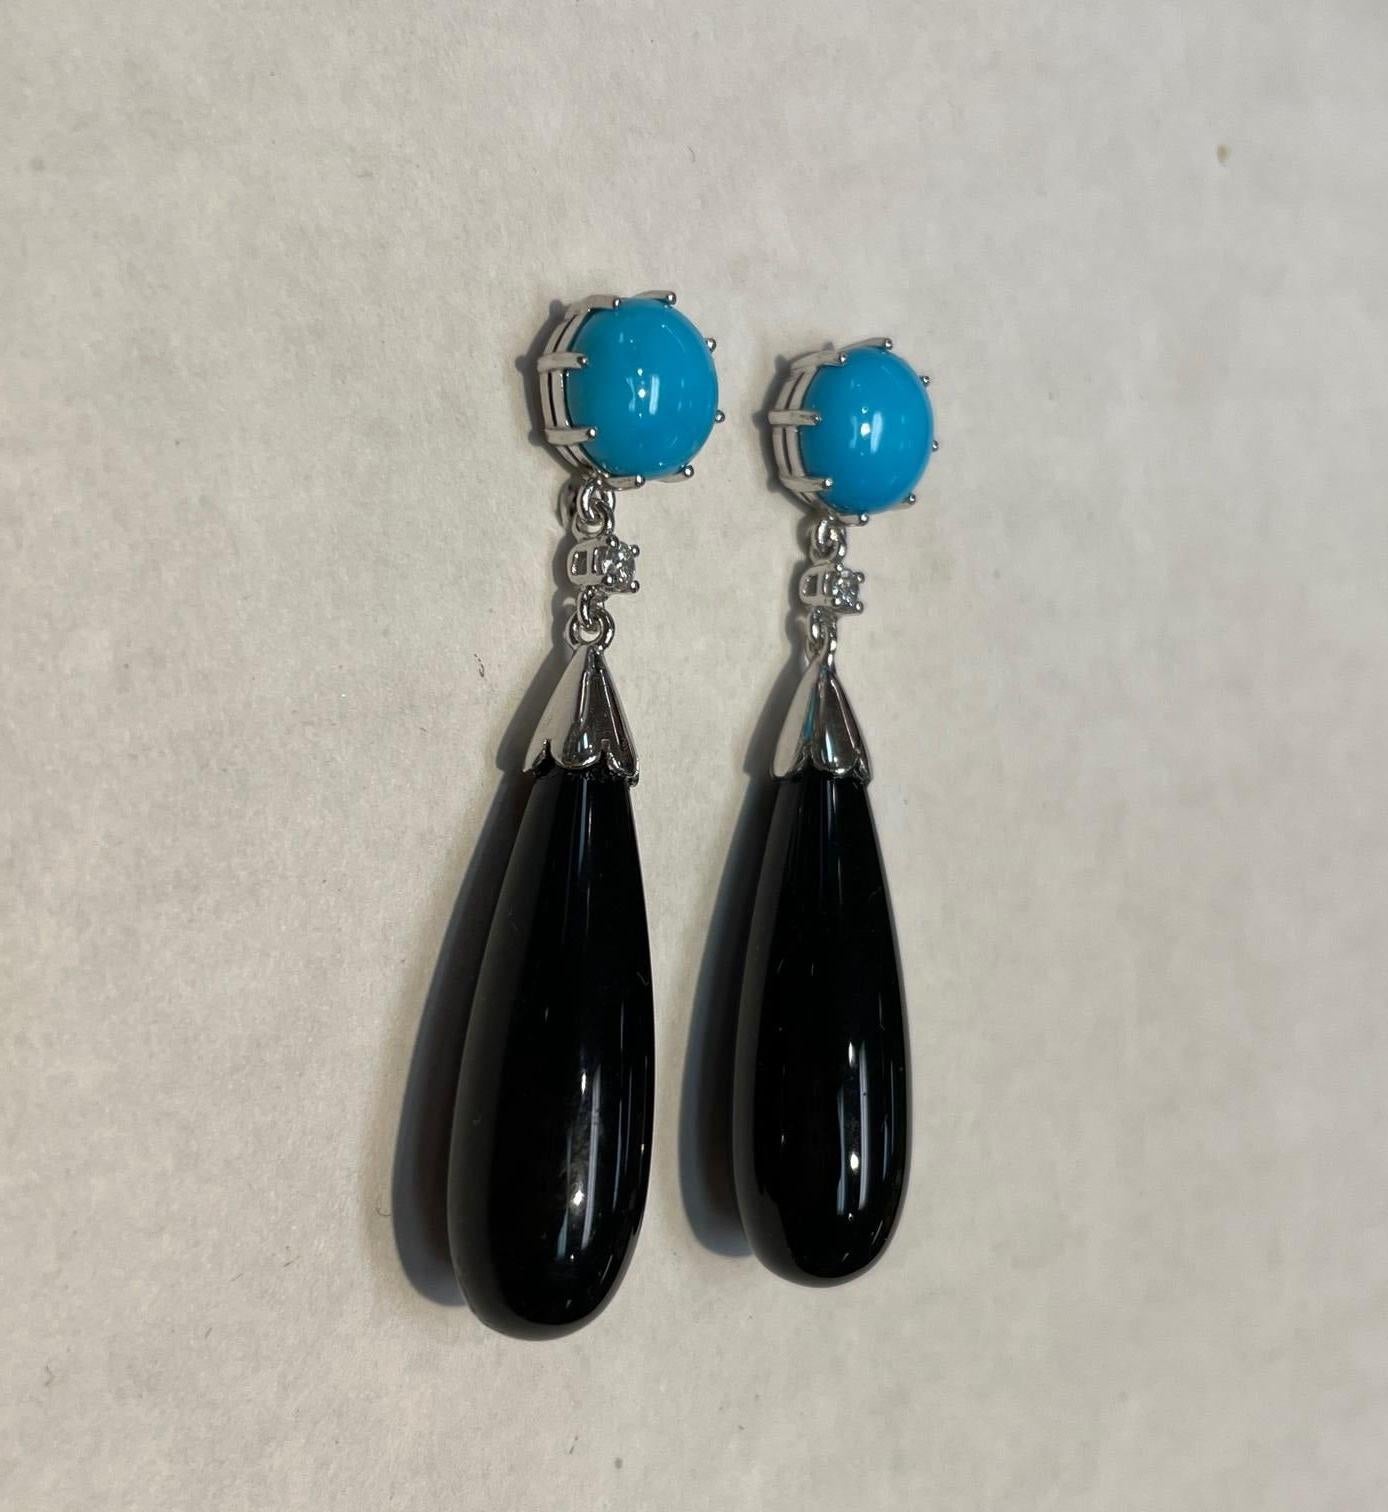 Simply Beautiful! Turquoise, Black Agate and Diamond Gold Drop Earrings. Each earring has a Hand set Turquoise and Diamond top, suspending a teardrop Black Agate. Approx. length of each Earring: 2”. Hand crafted. Stamped 14K. Post and butterfly